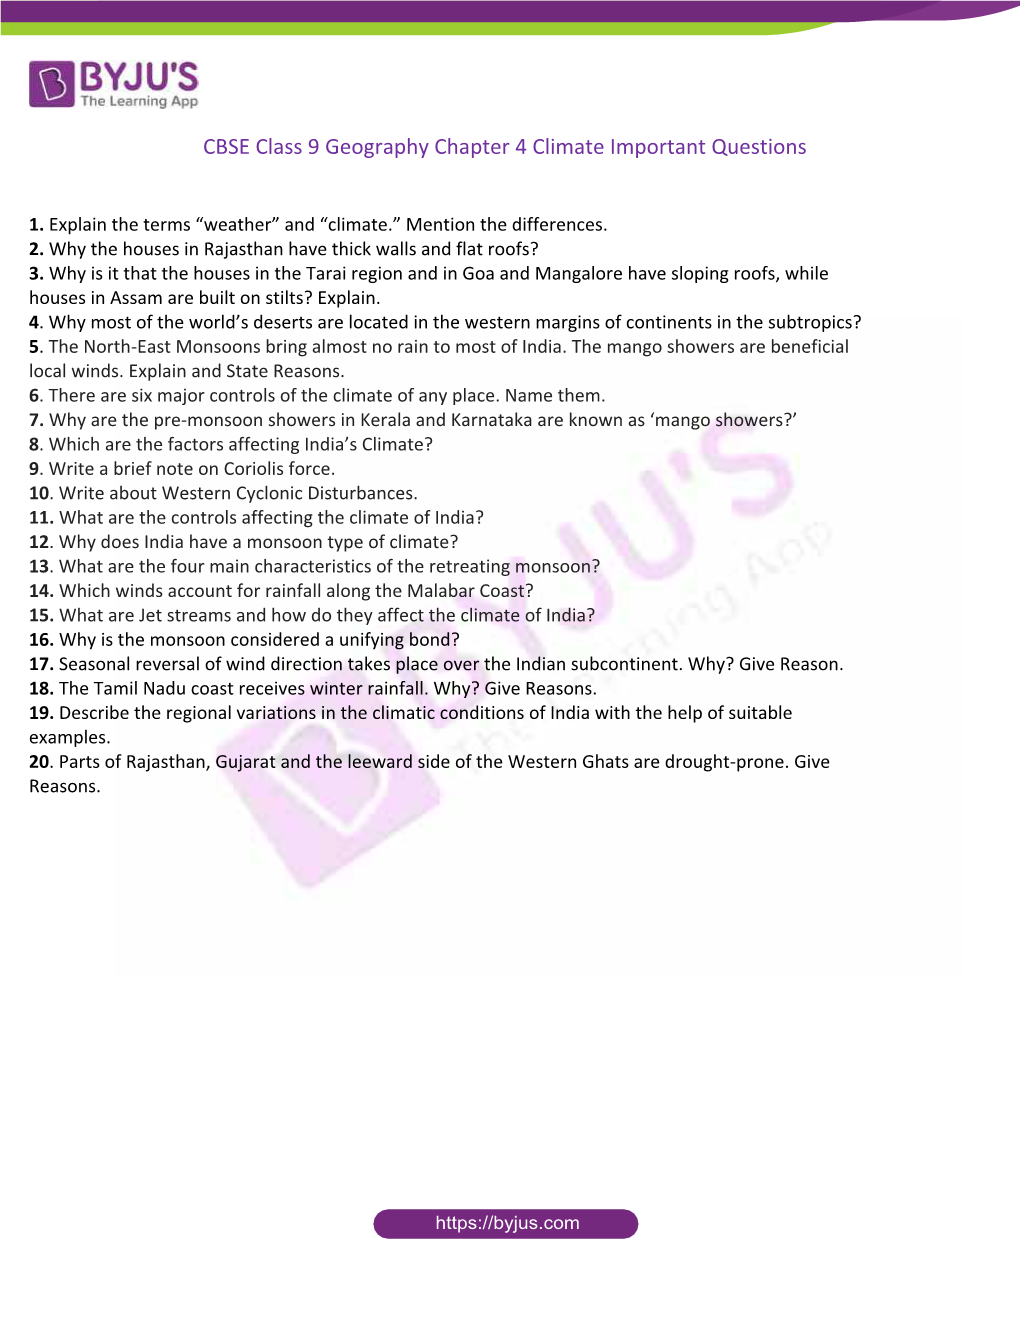 CBSE Class 9 Geography Chapter 4 Climate Important Questions